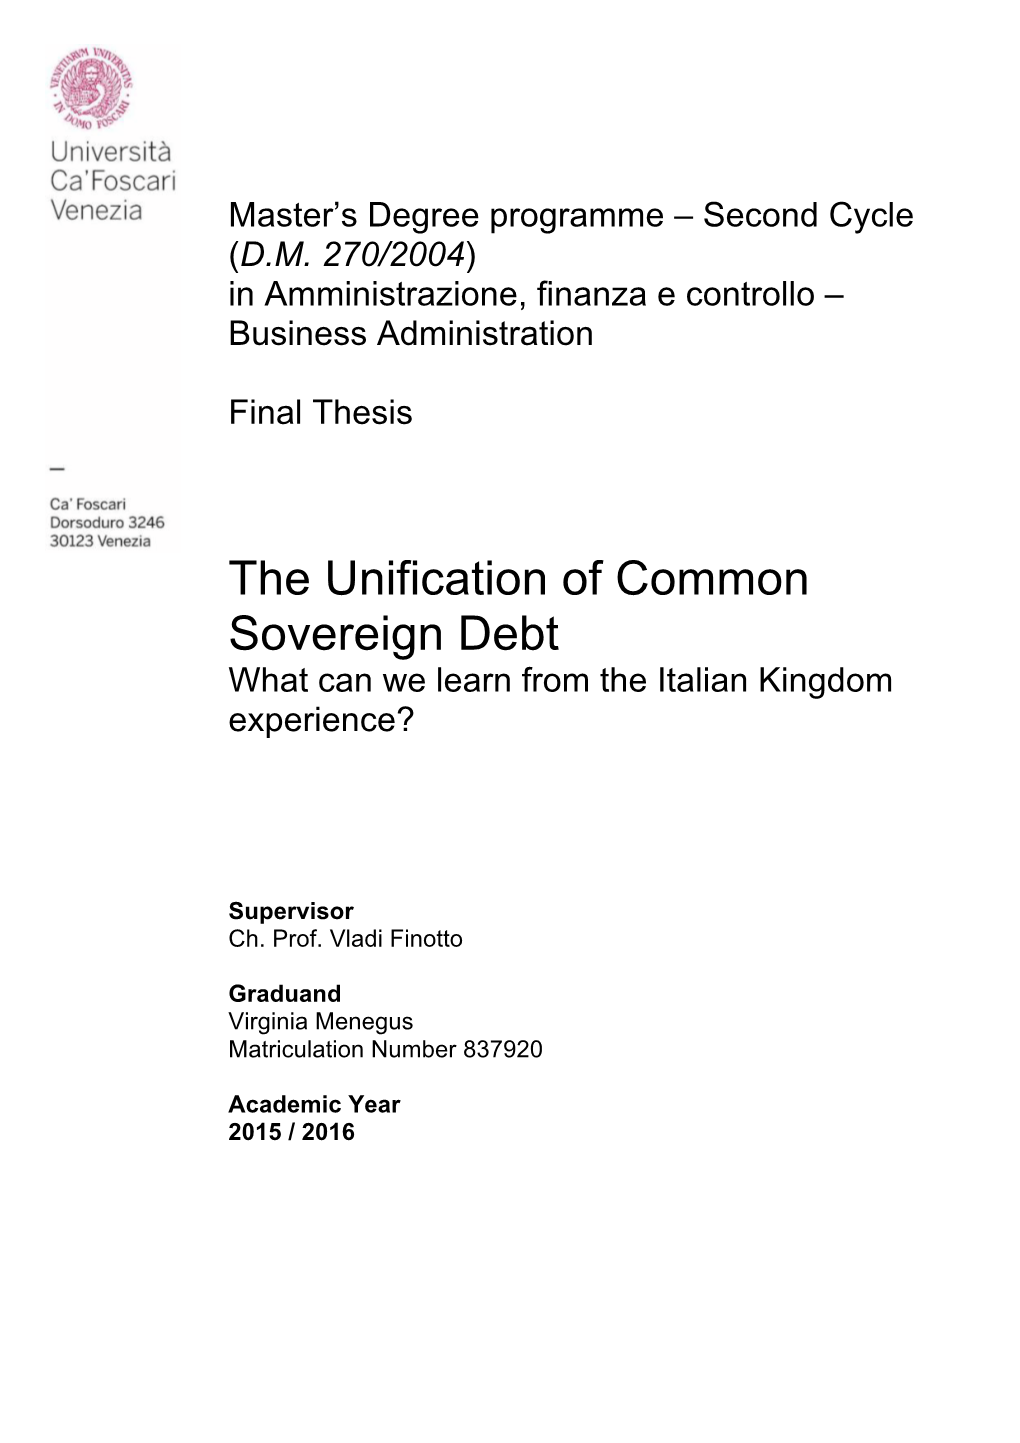 The Unification of Common Sovereign Debt What Can We Learn from the Italian Kingdom Experience?